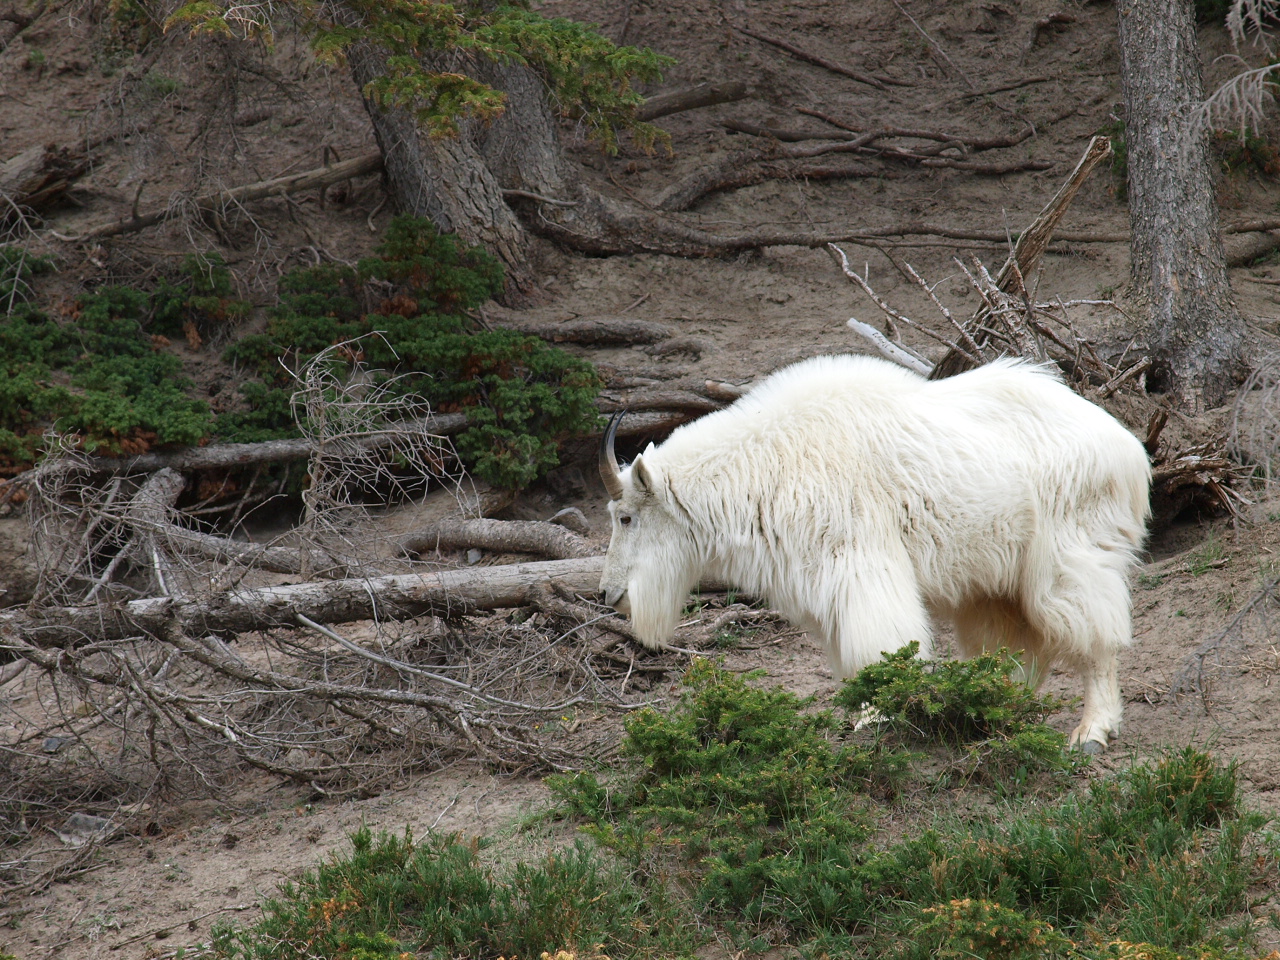 a white bear near some trees and brush